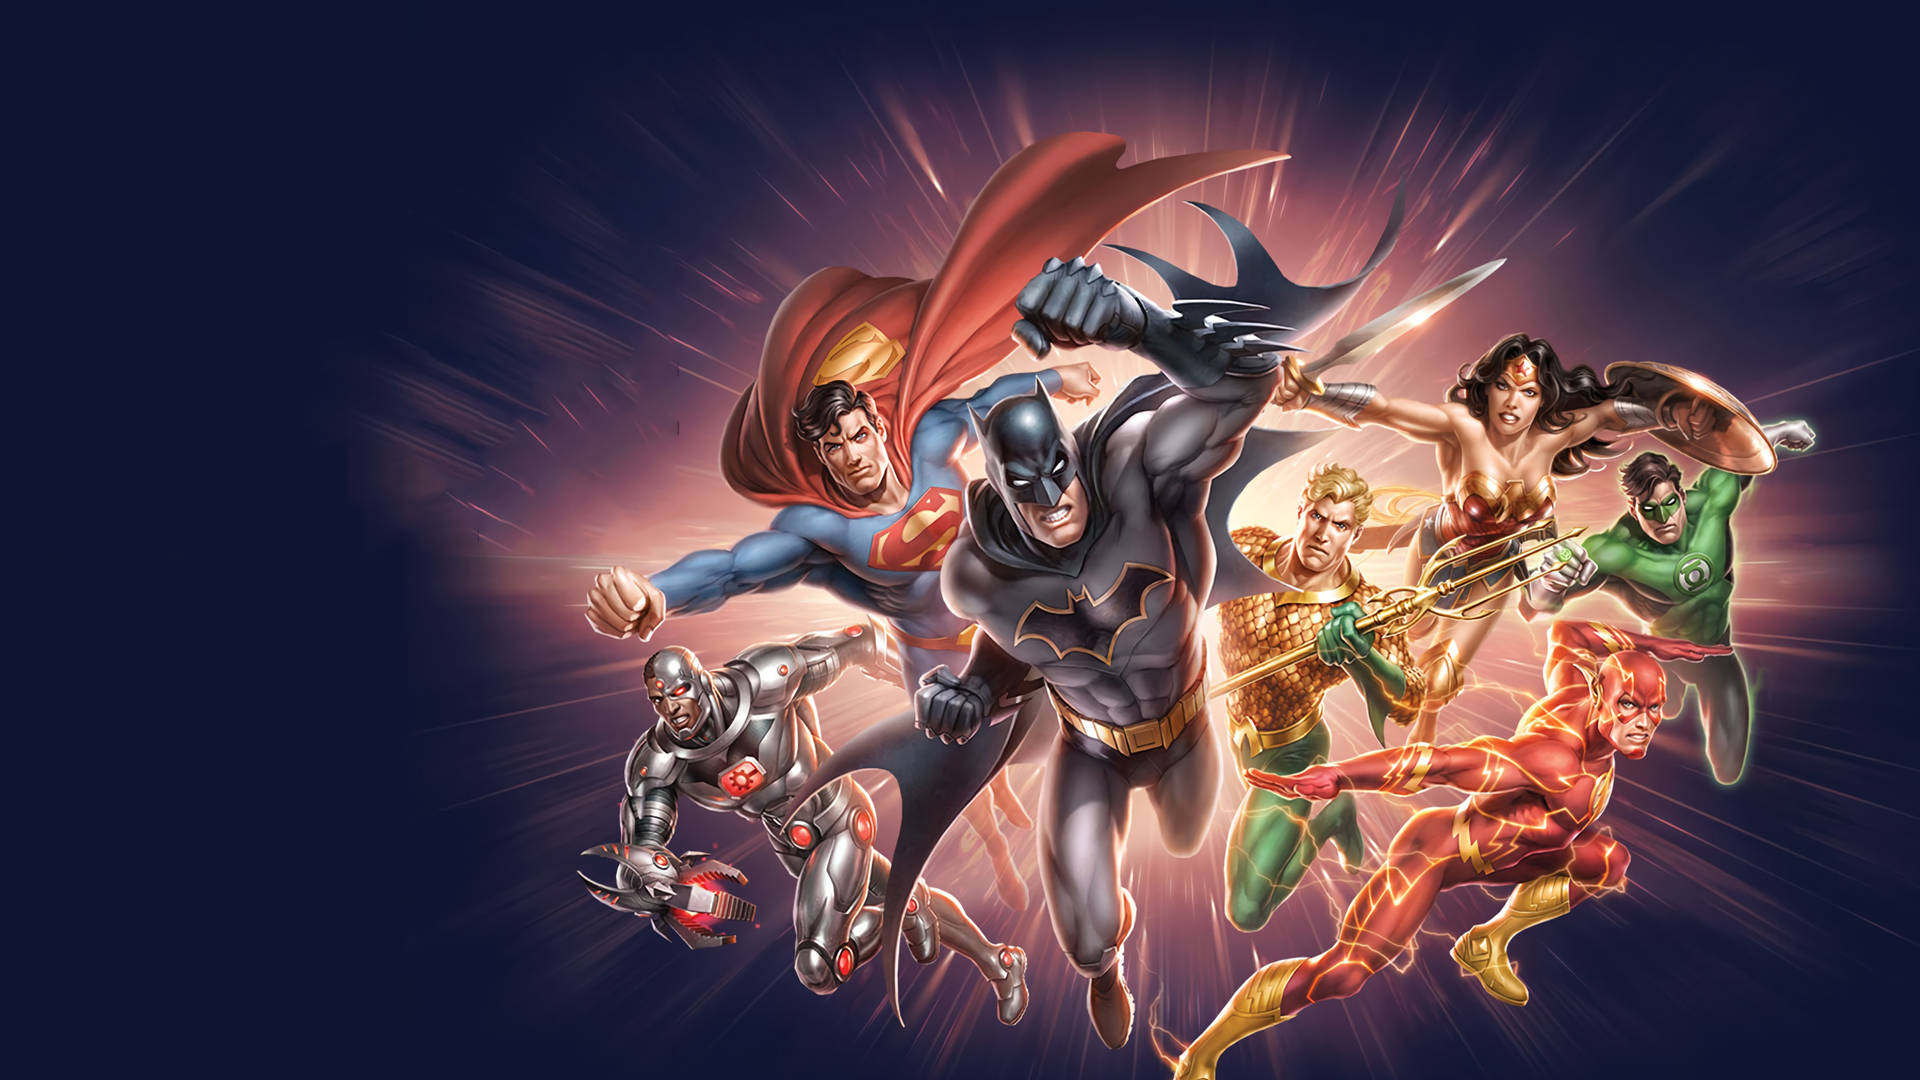 Video Game DC Universe Online Animated Superheroes Wallpaper